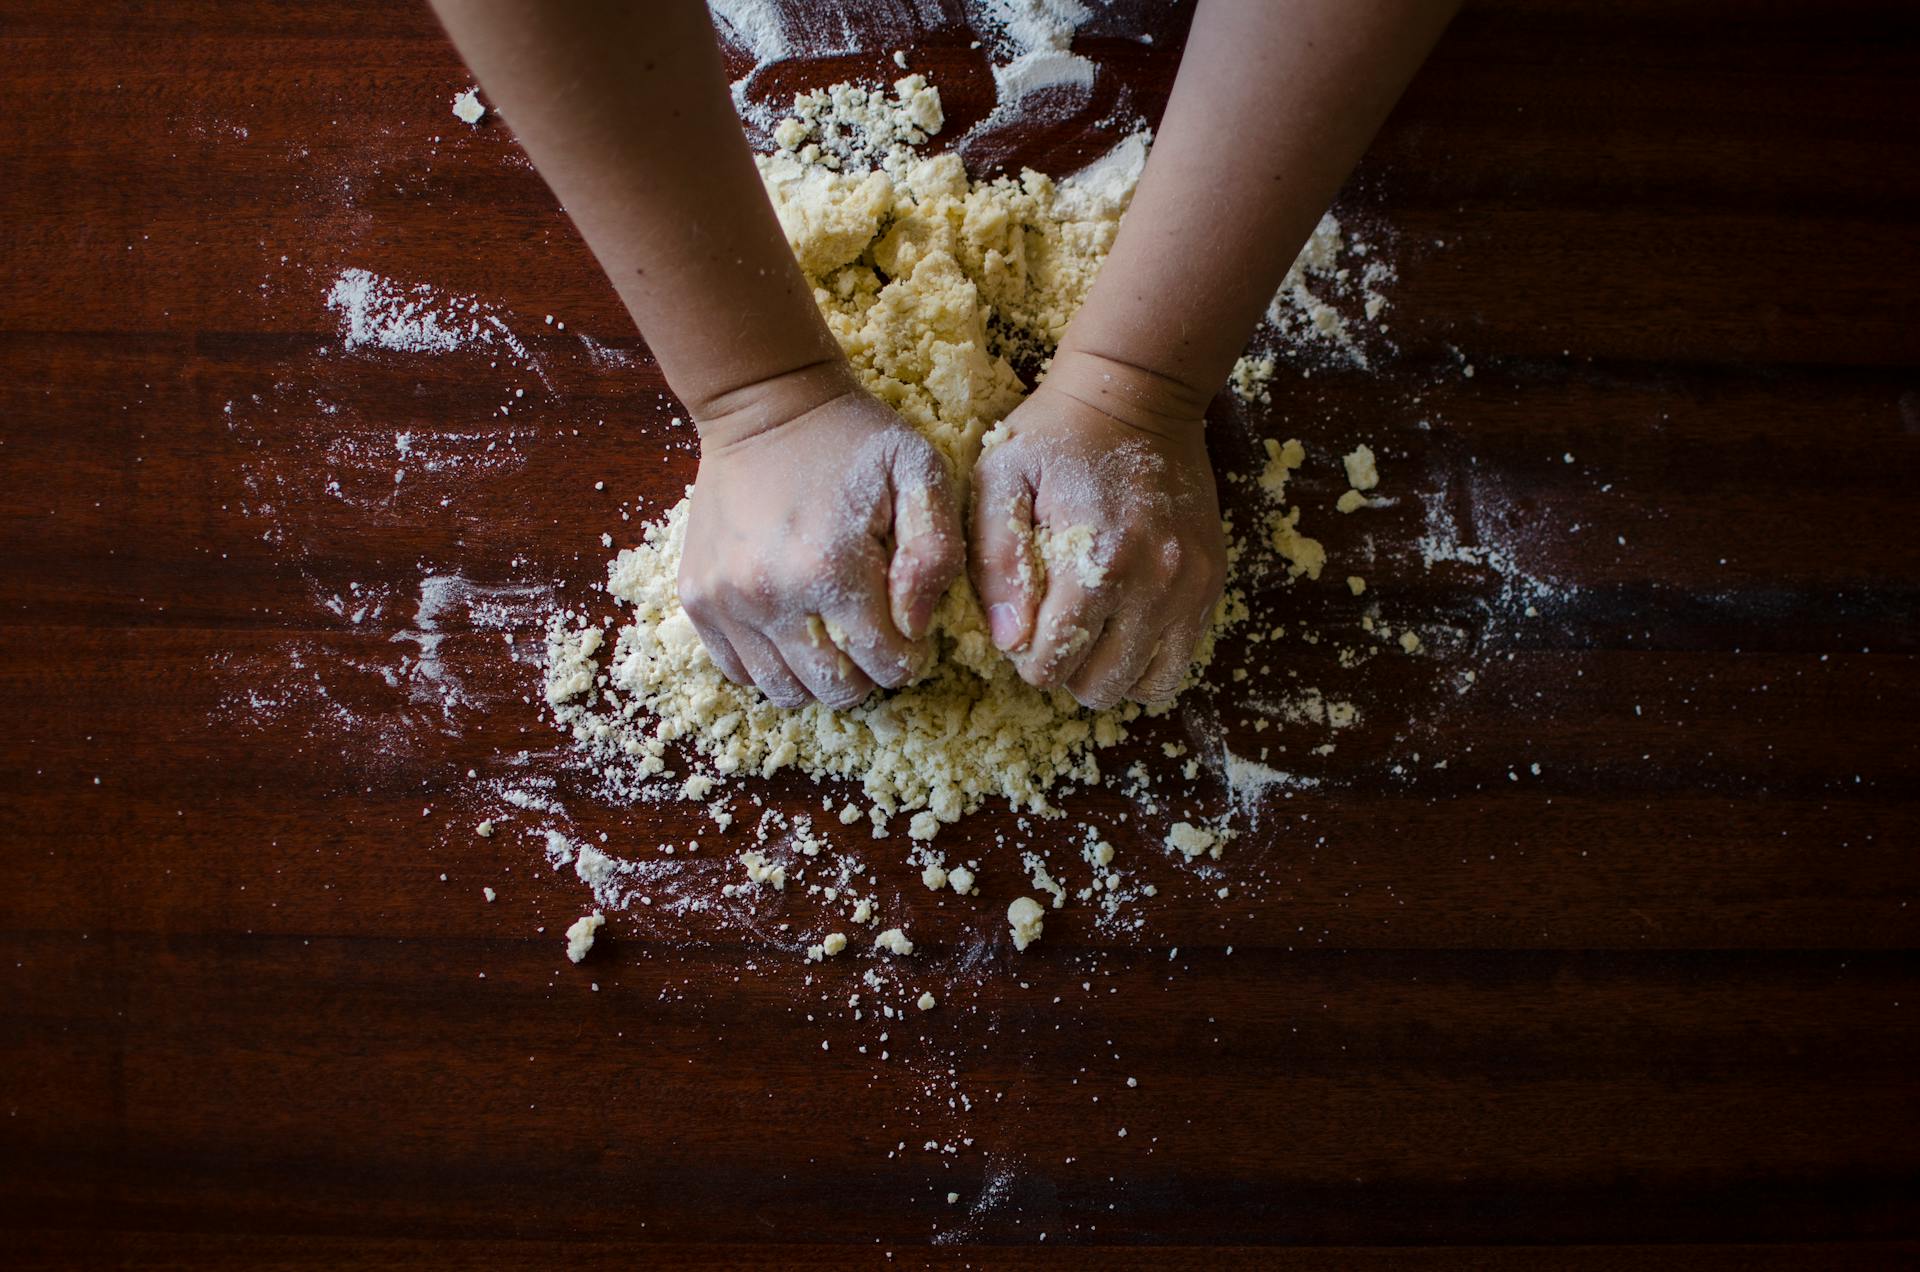 A person kneading dough | Source: Pexels